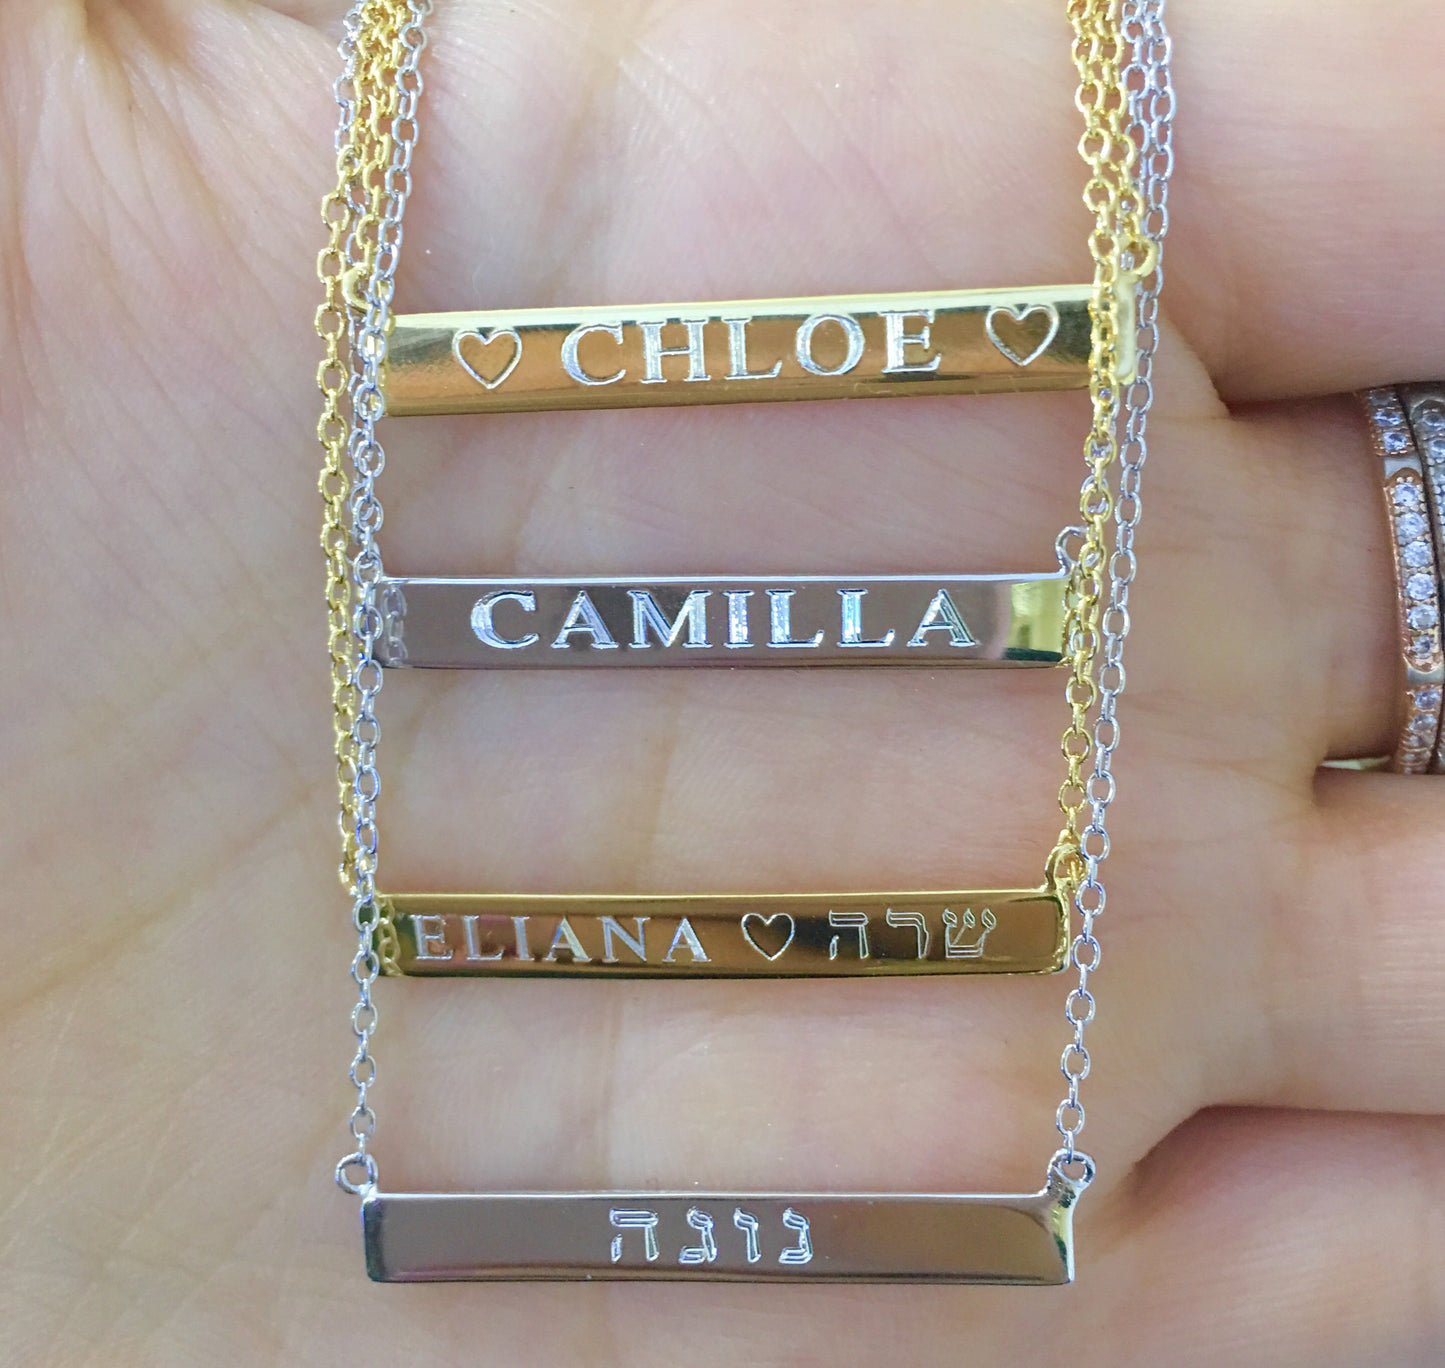 Standard Bar Engraved Nameplate Necklace - Retail Therapy Jewelry